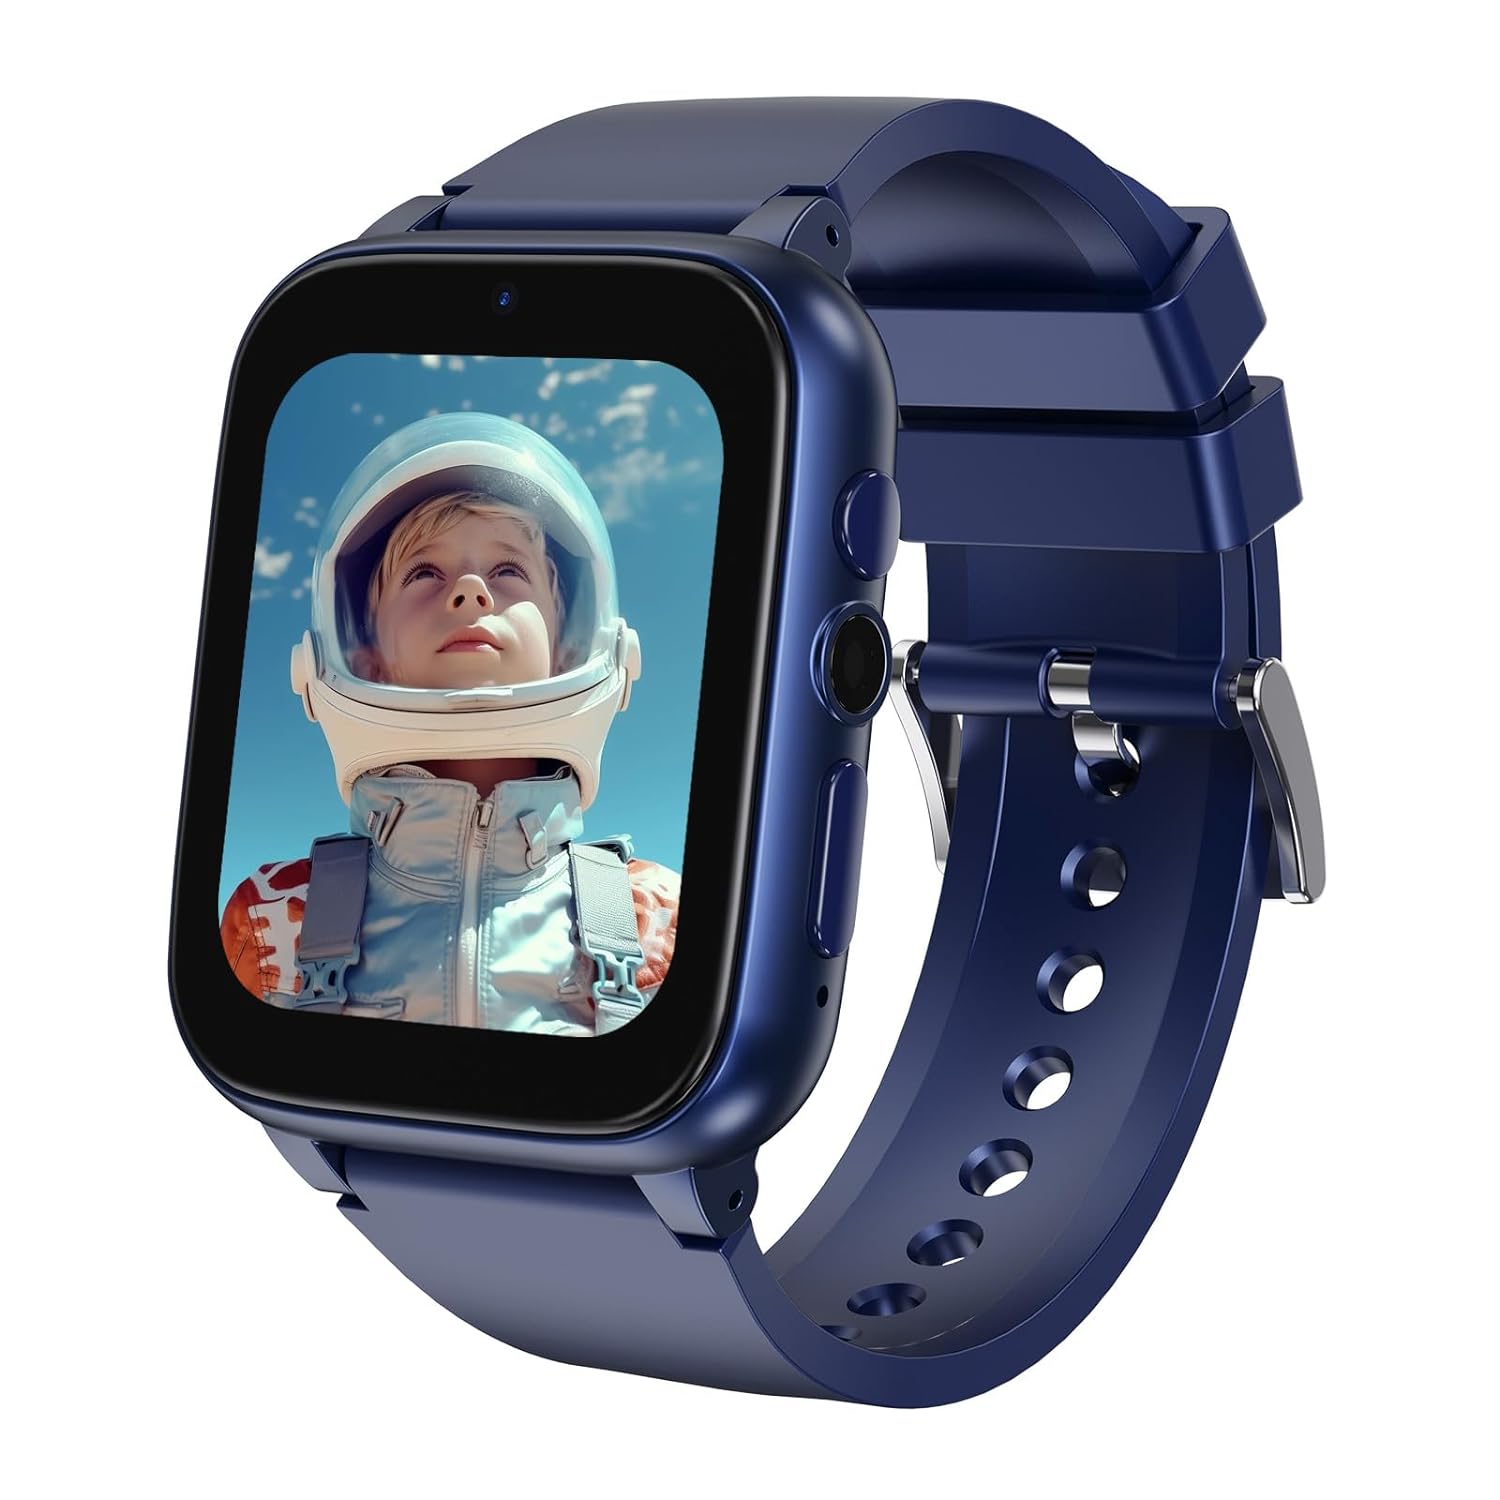 iCHOMKE Smart Watch for Kids, Girls Boys Smartwatch with 26 Games Camera Video Recorder and Player, Pedometer Calendar Flashlight, Audio Book etc., Gifts for 4-12 Years Children (Blue)